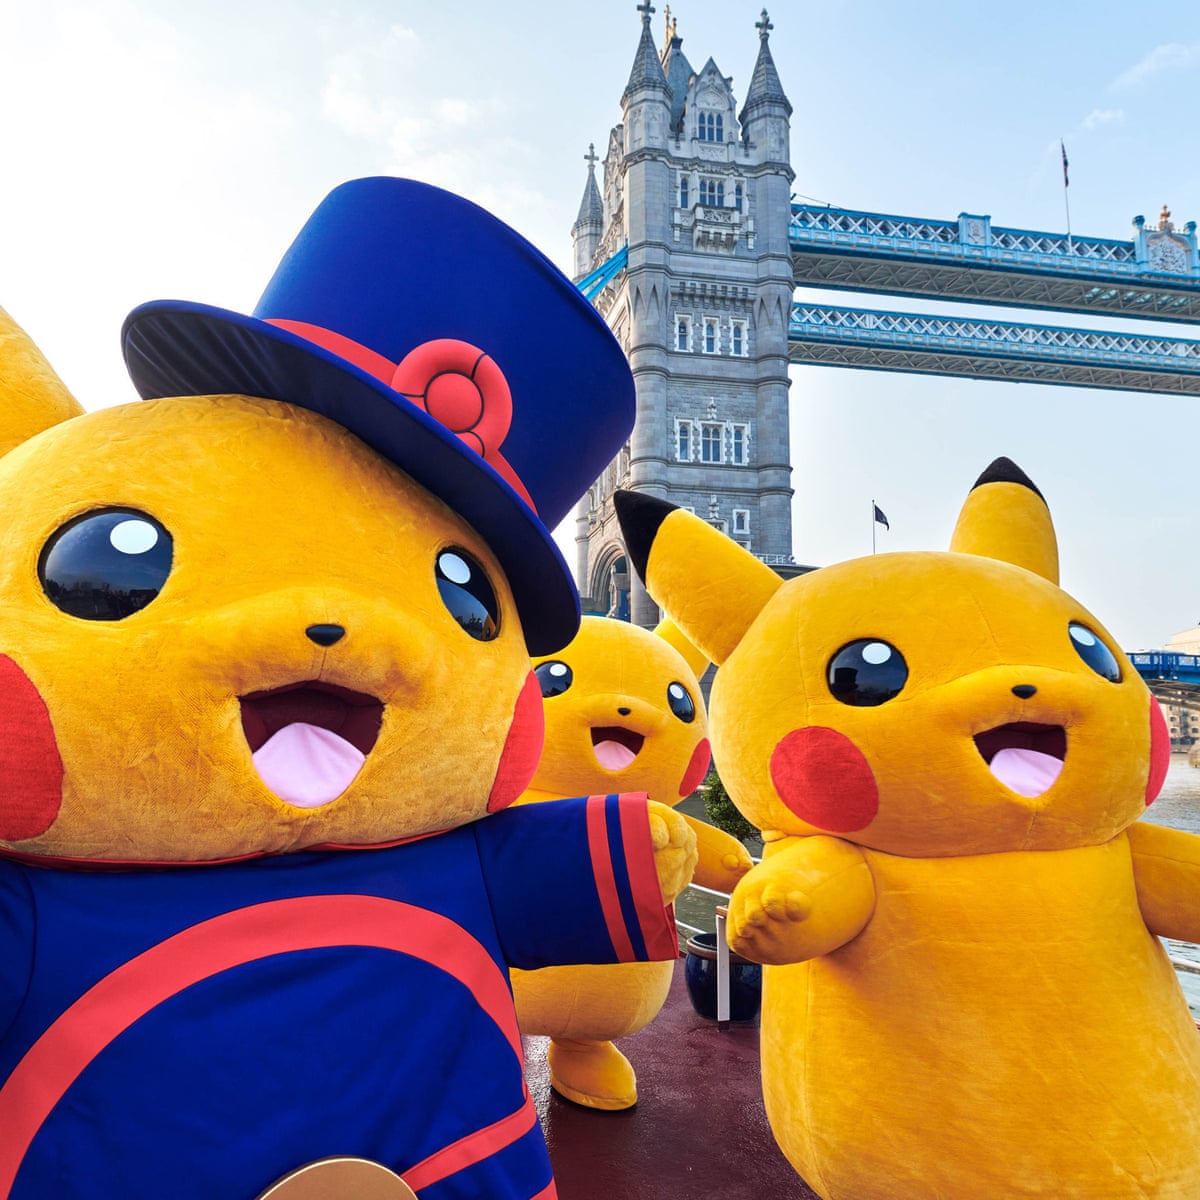 Still catching 'em all: why the Pokémon World Championships are bigger than  ever, Games